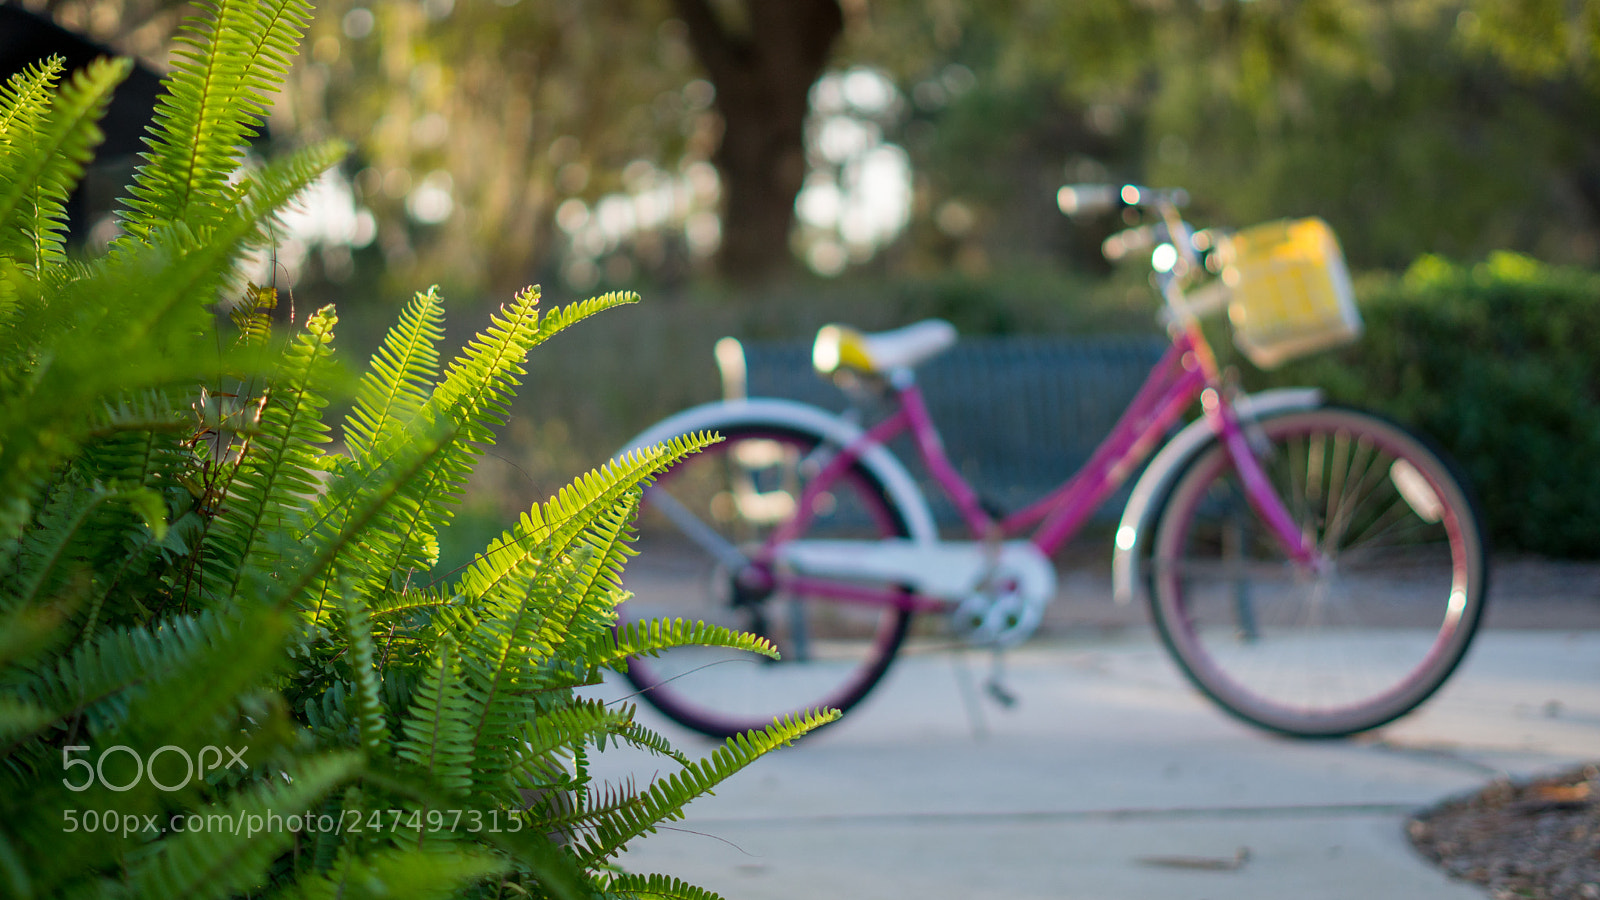 Sony a6500 sample photo. Pink bike in the photography